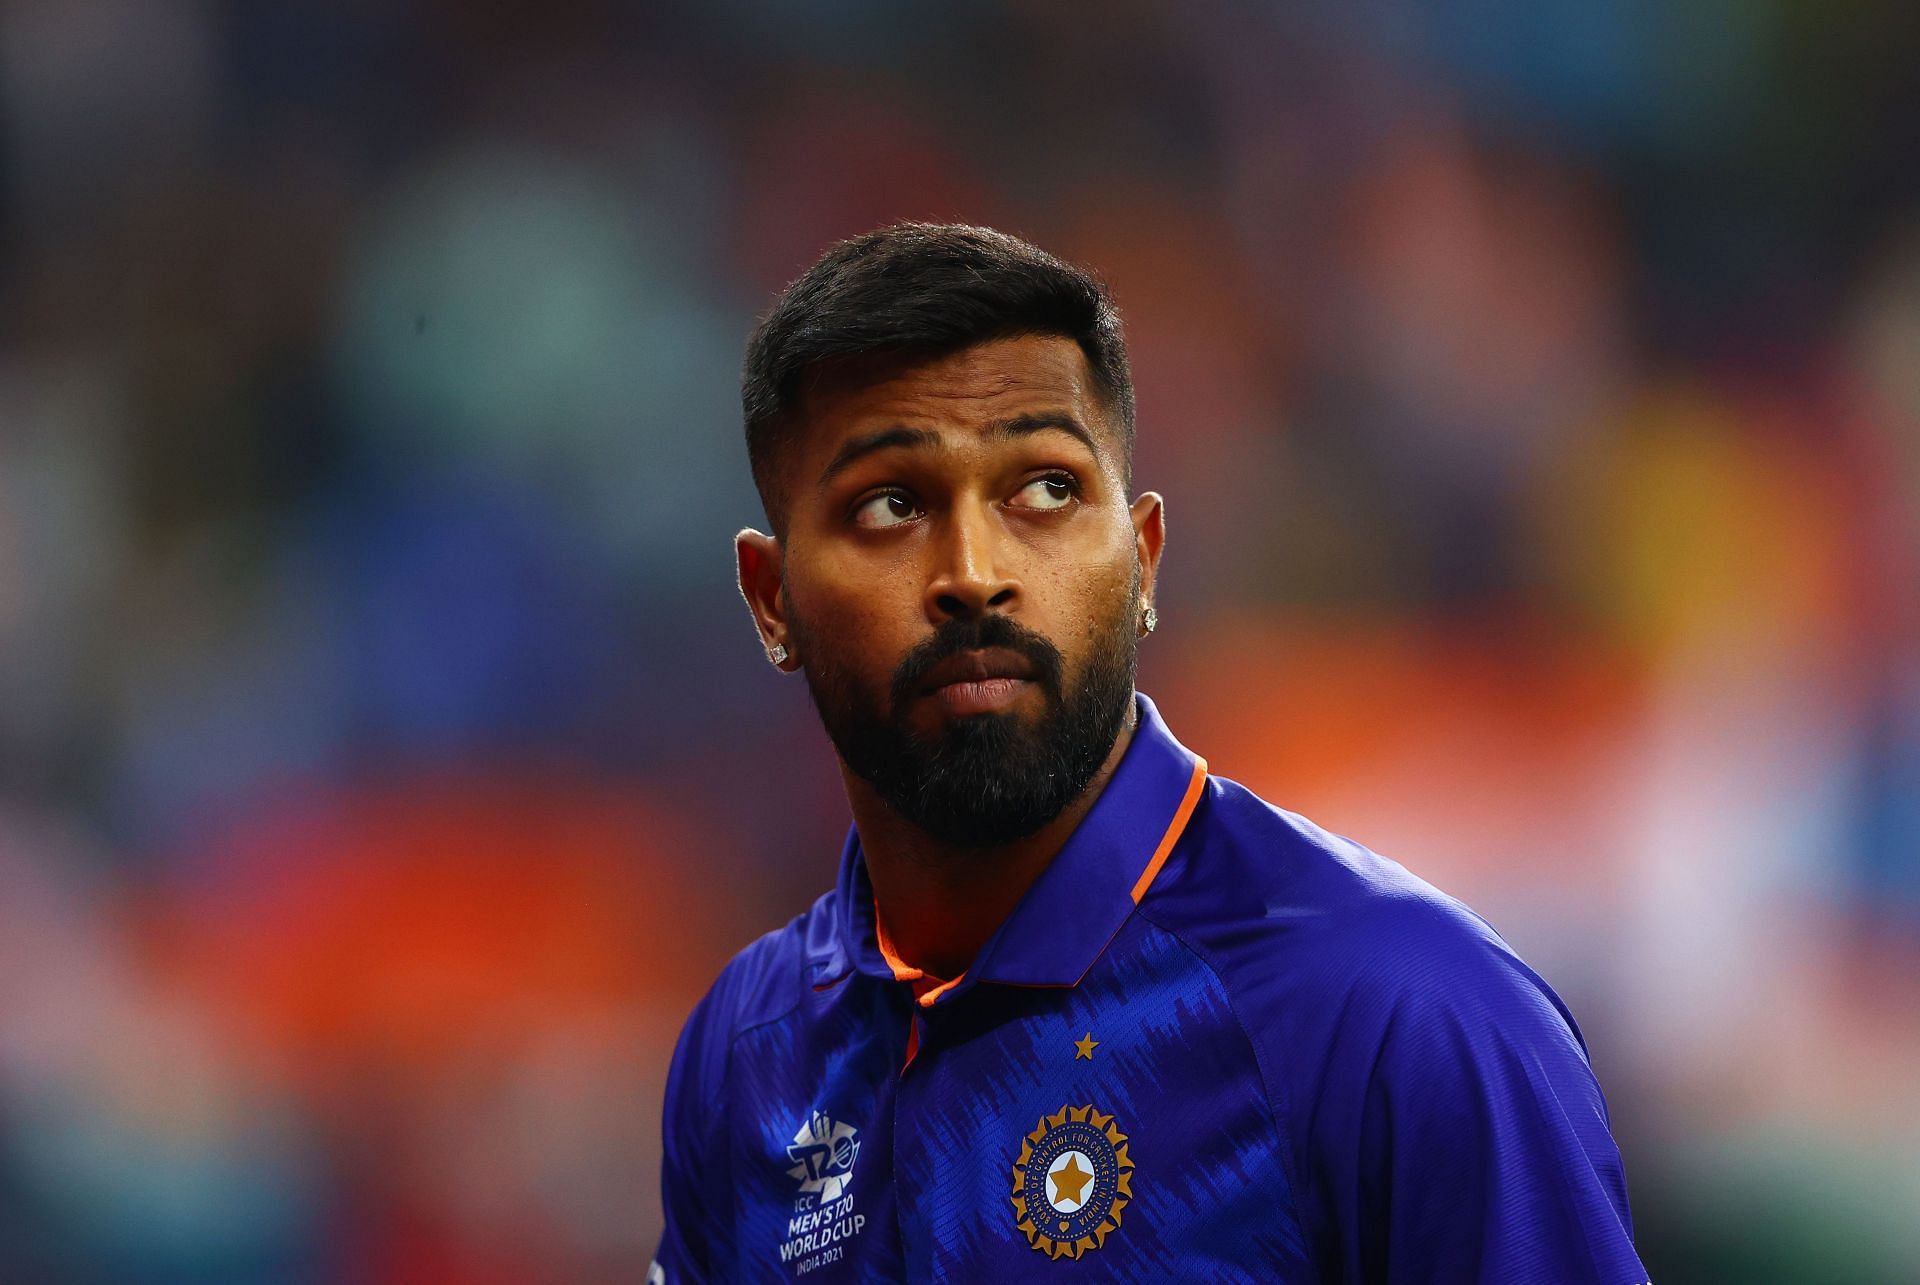 Zaheer Khan feels Hardik Pandya will have an eye on the T20 World Cup squad (Credit: Getty Images)